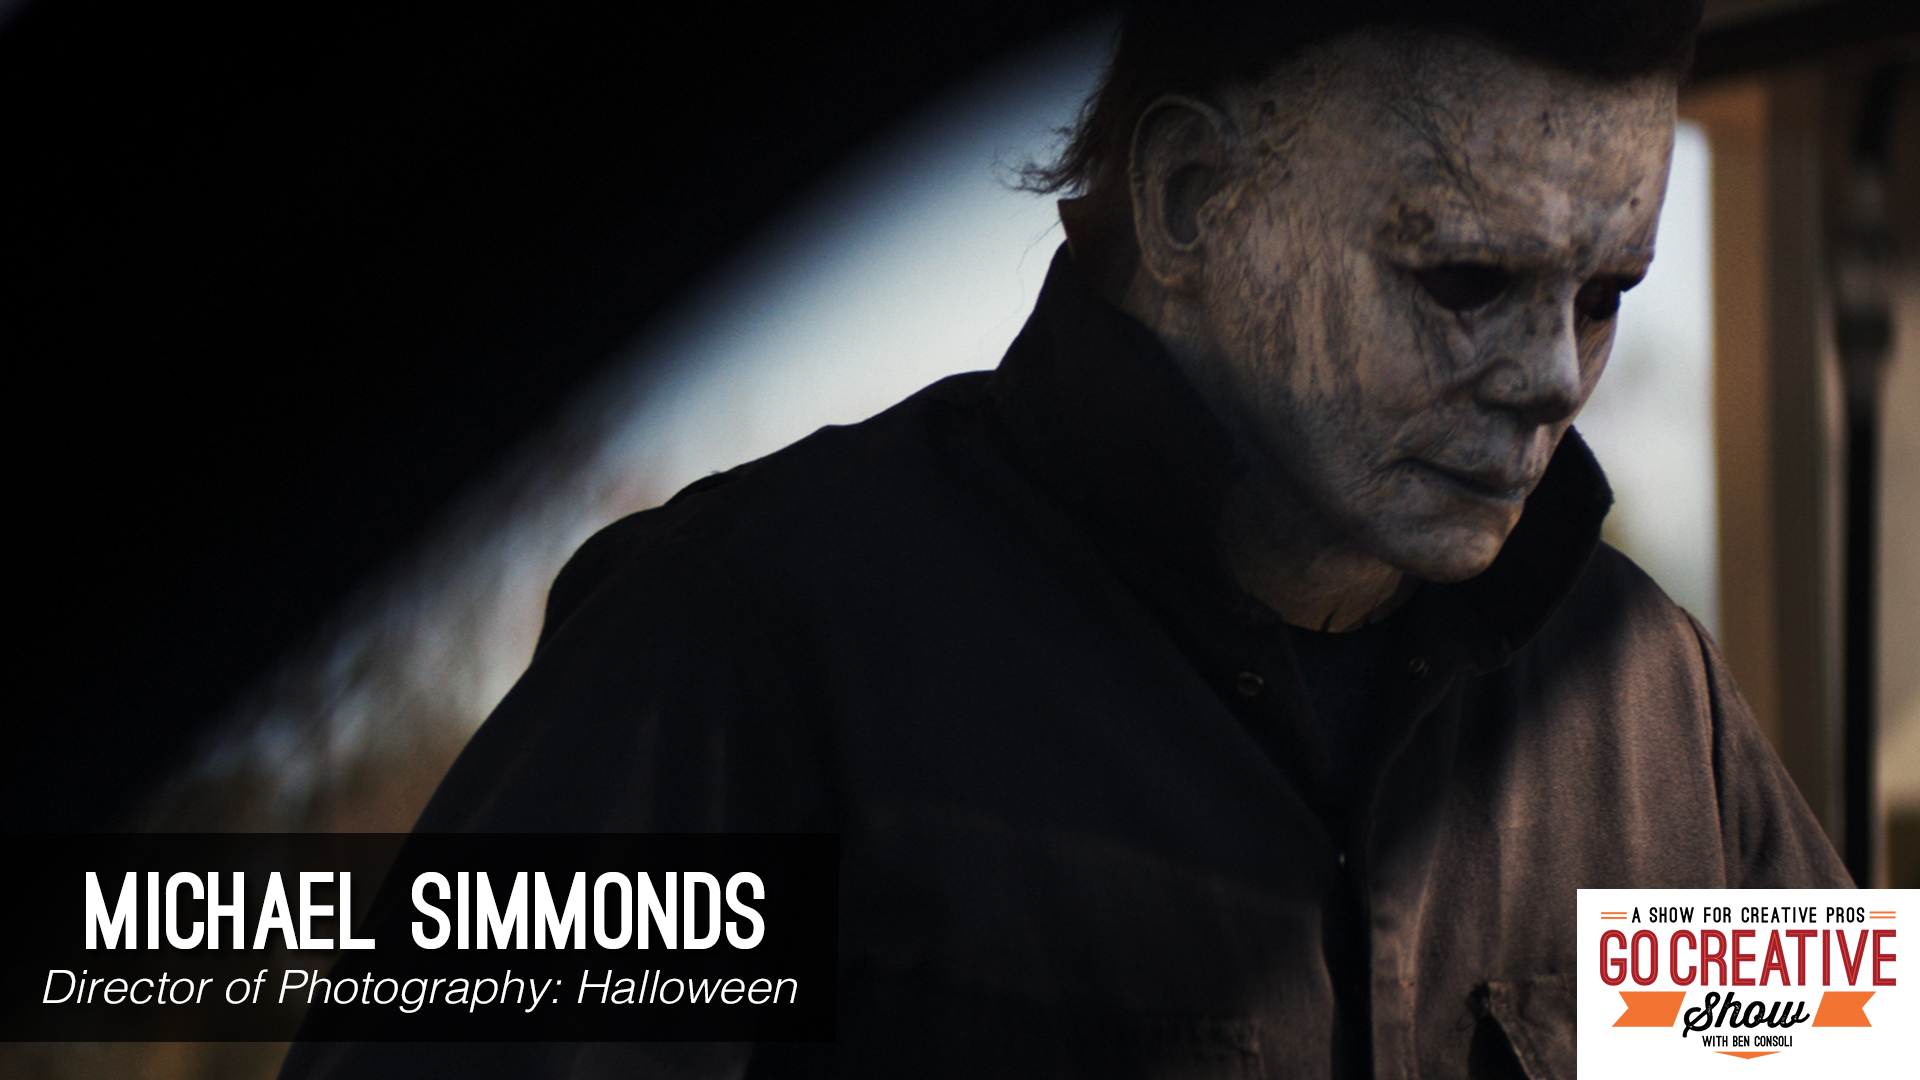 Halloween Movie director of photography Michael Simmonds on Go Creative Show podcast with Ben Consoli